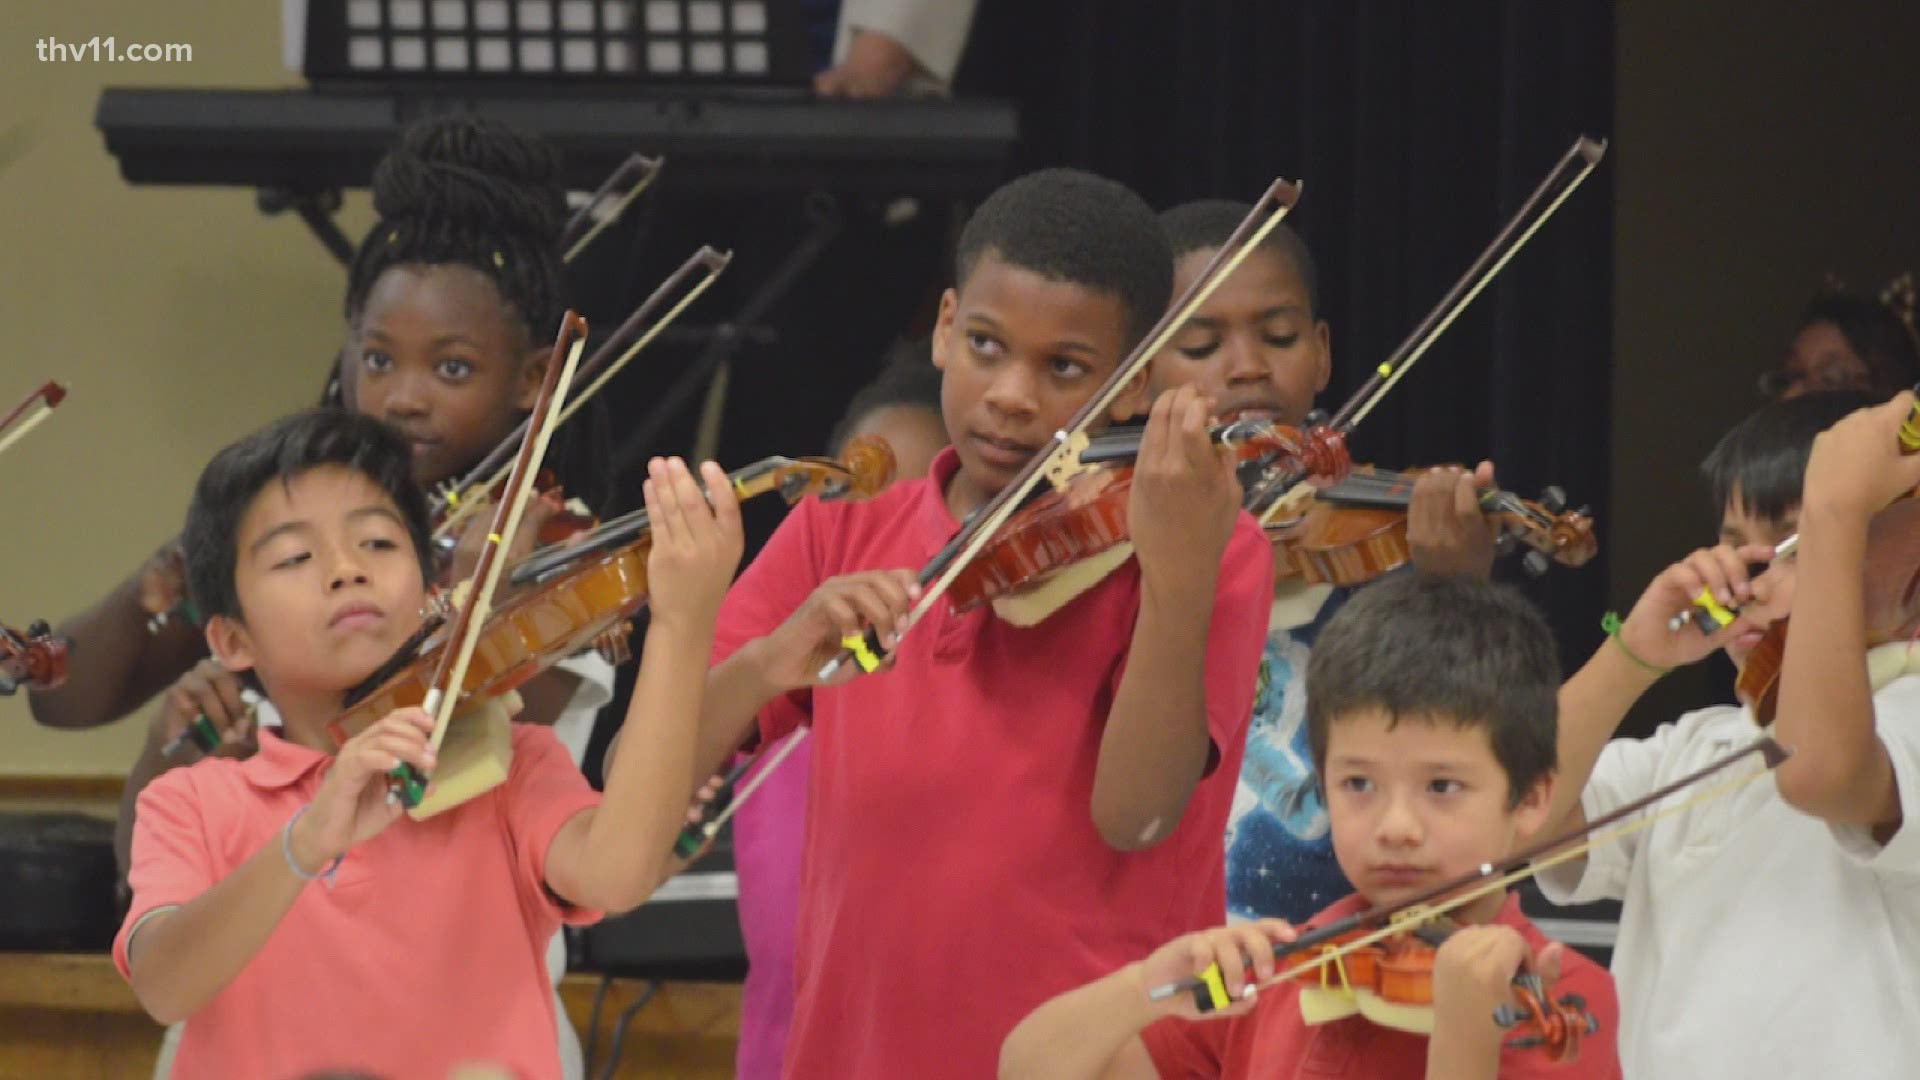 ASO believes all children should have access to music, and today they need your help to continue their mission. www.arkansassymphony.org/support